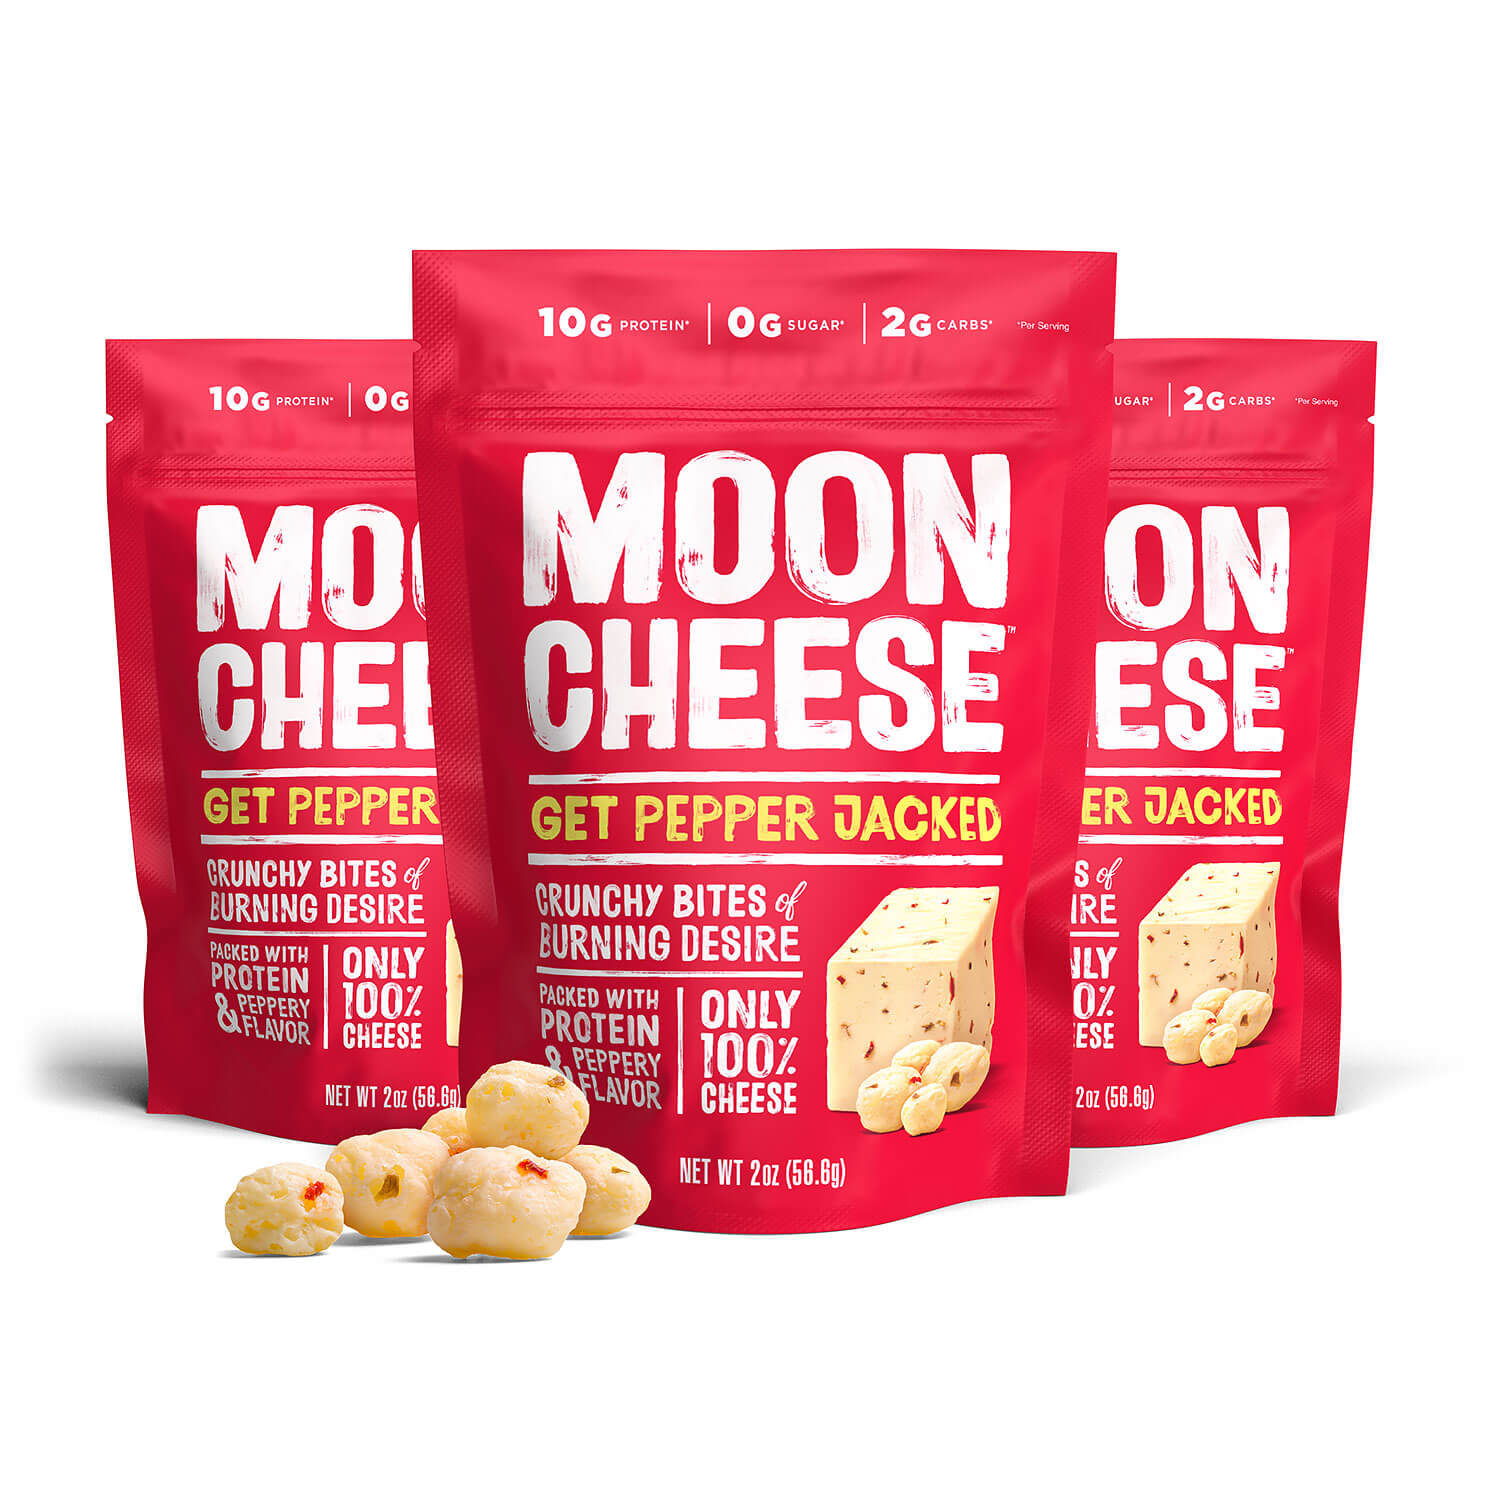 [Moon Cheese] Get Pepper Jacked I 2oz Bag I 9 Pack exclusive at